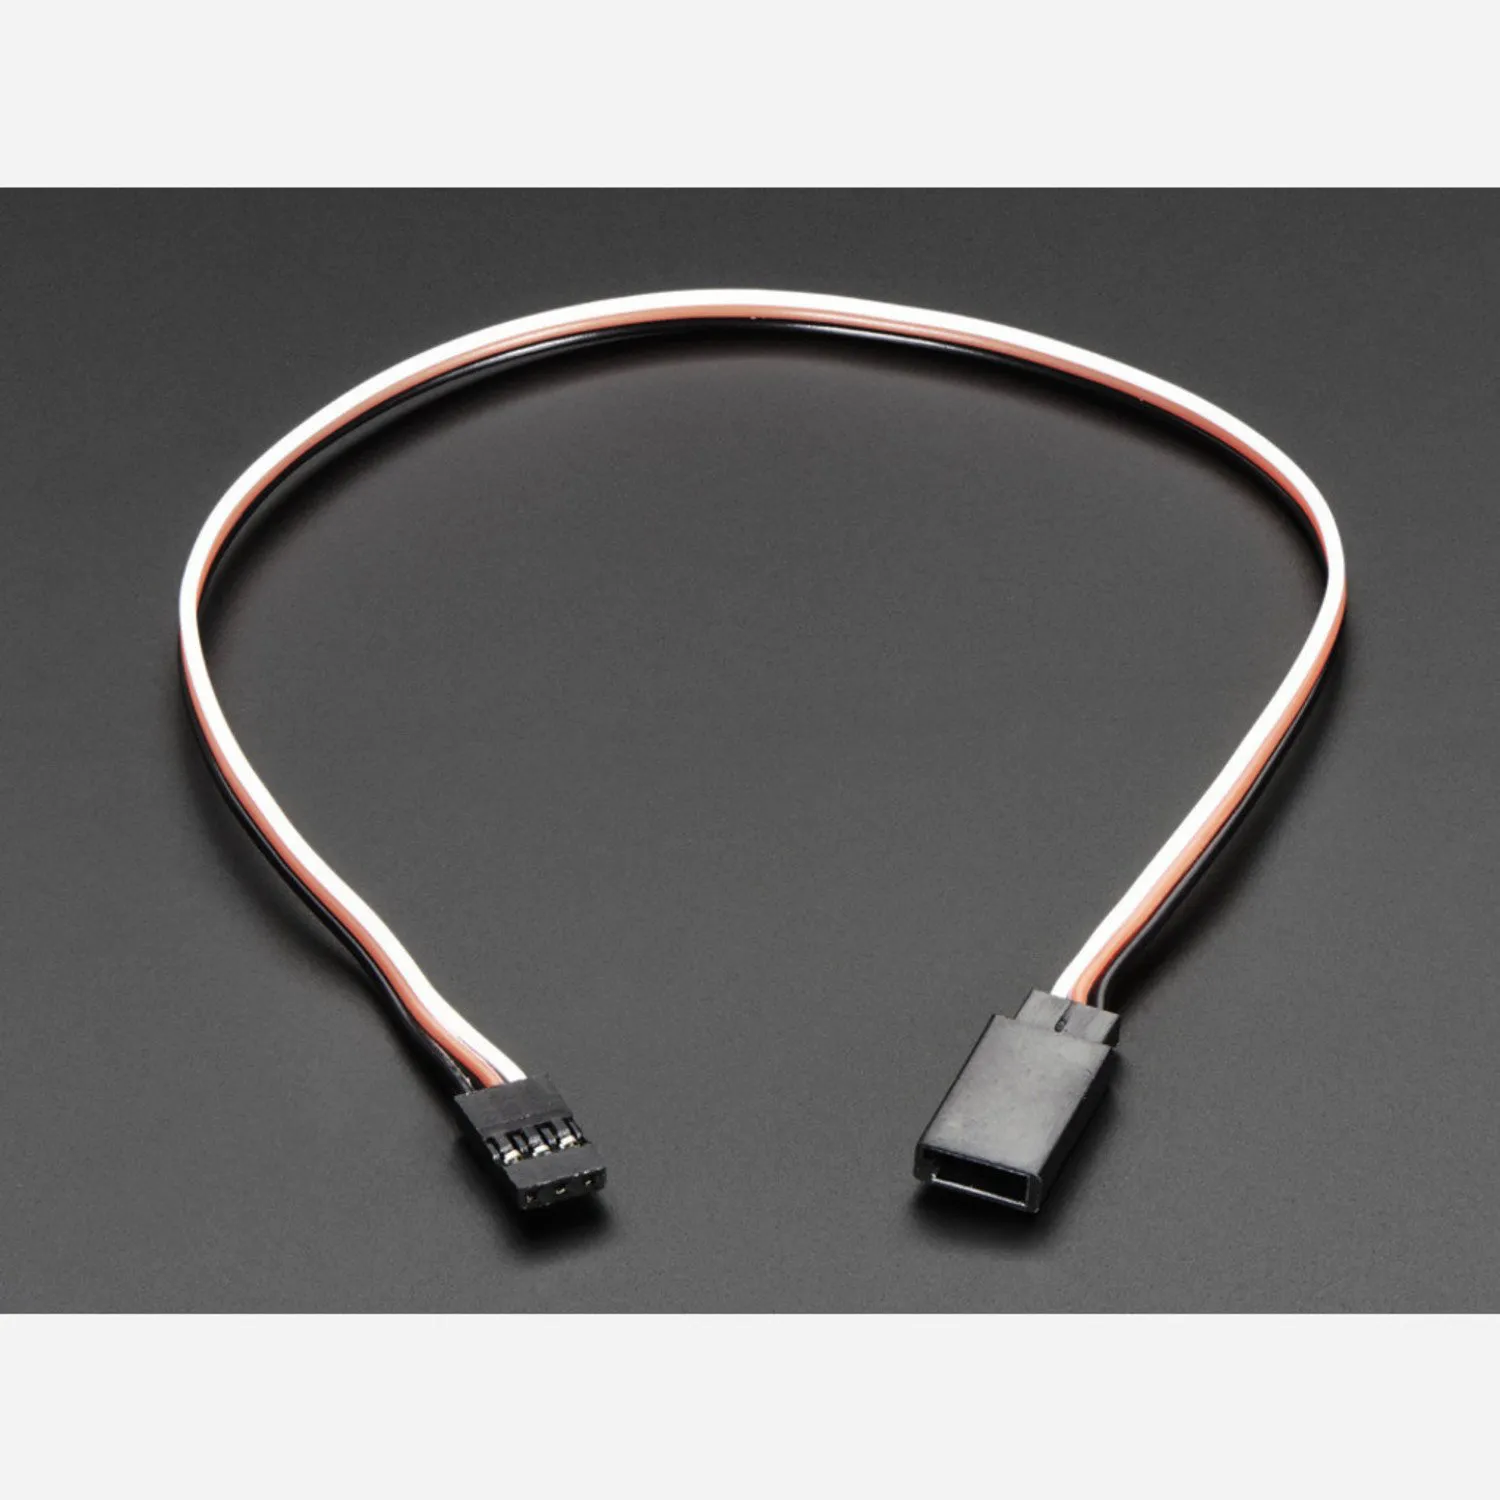 Photo of Servo Extension Cable - 30cm / 12 long -